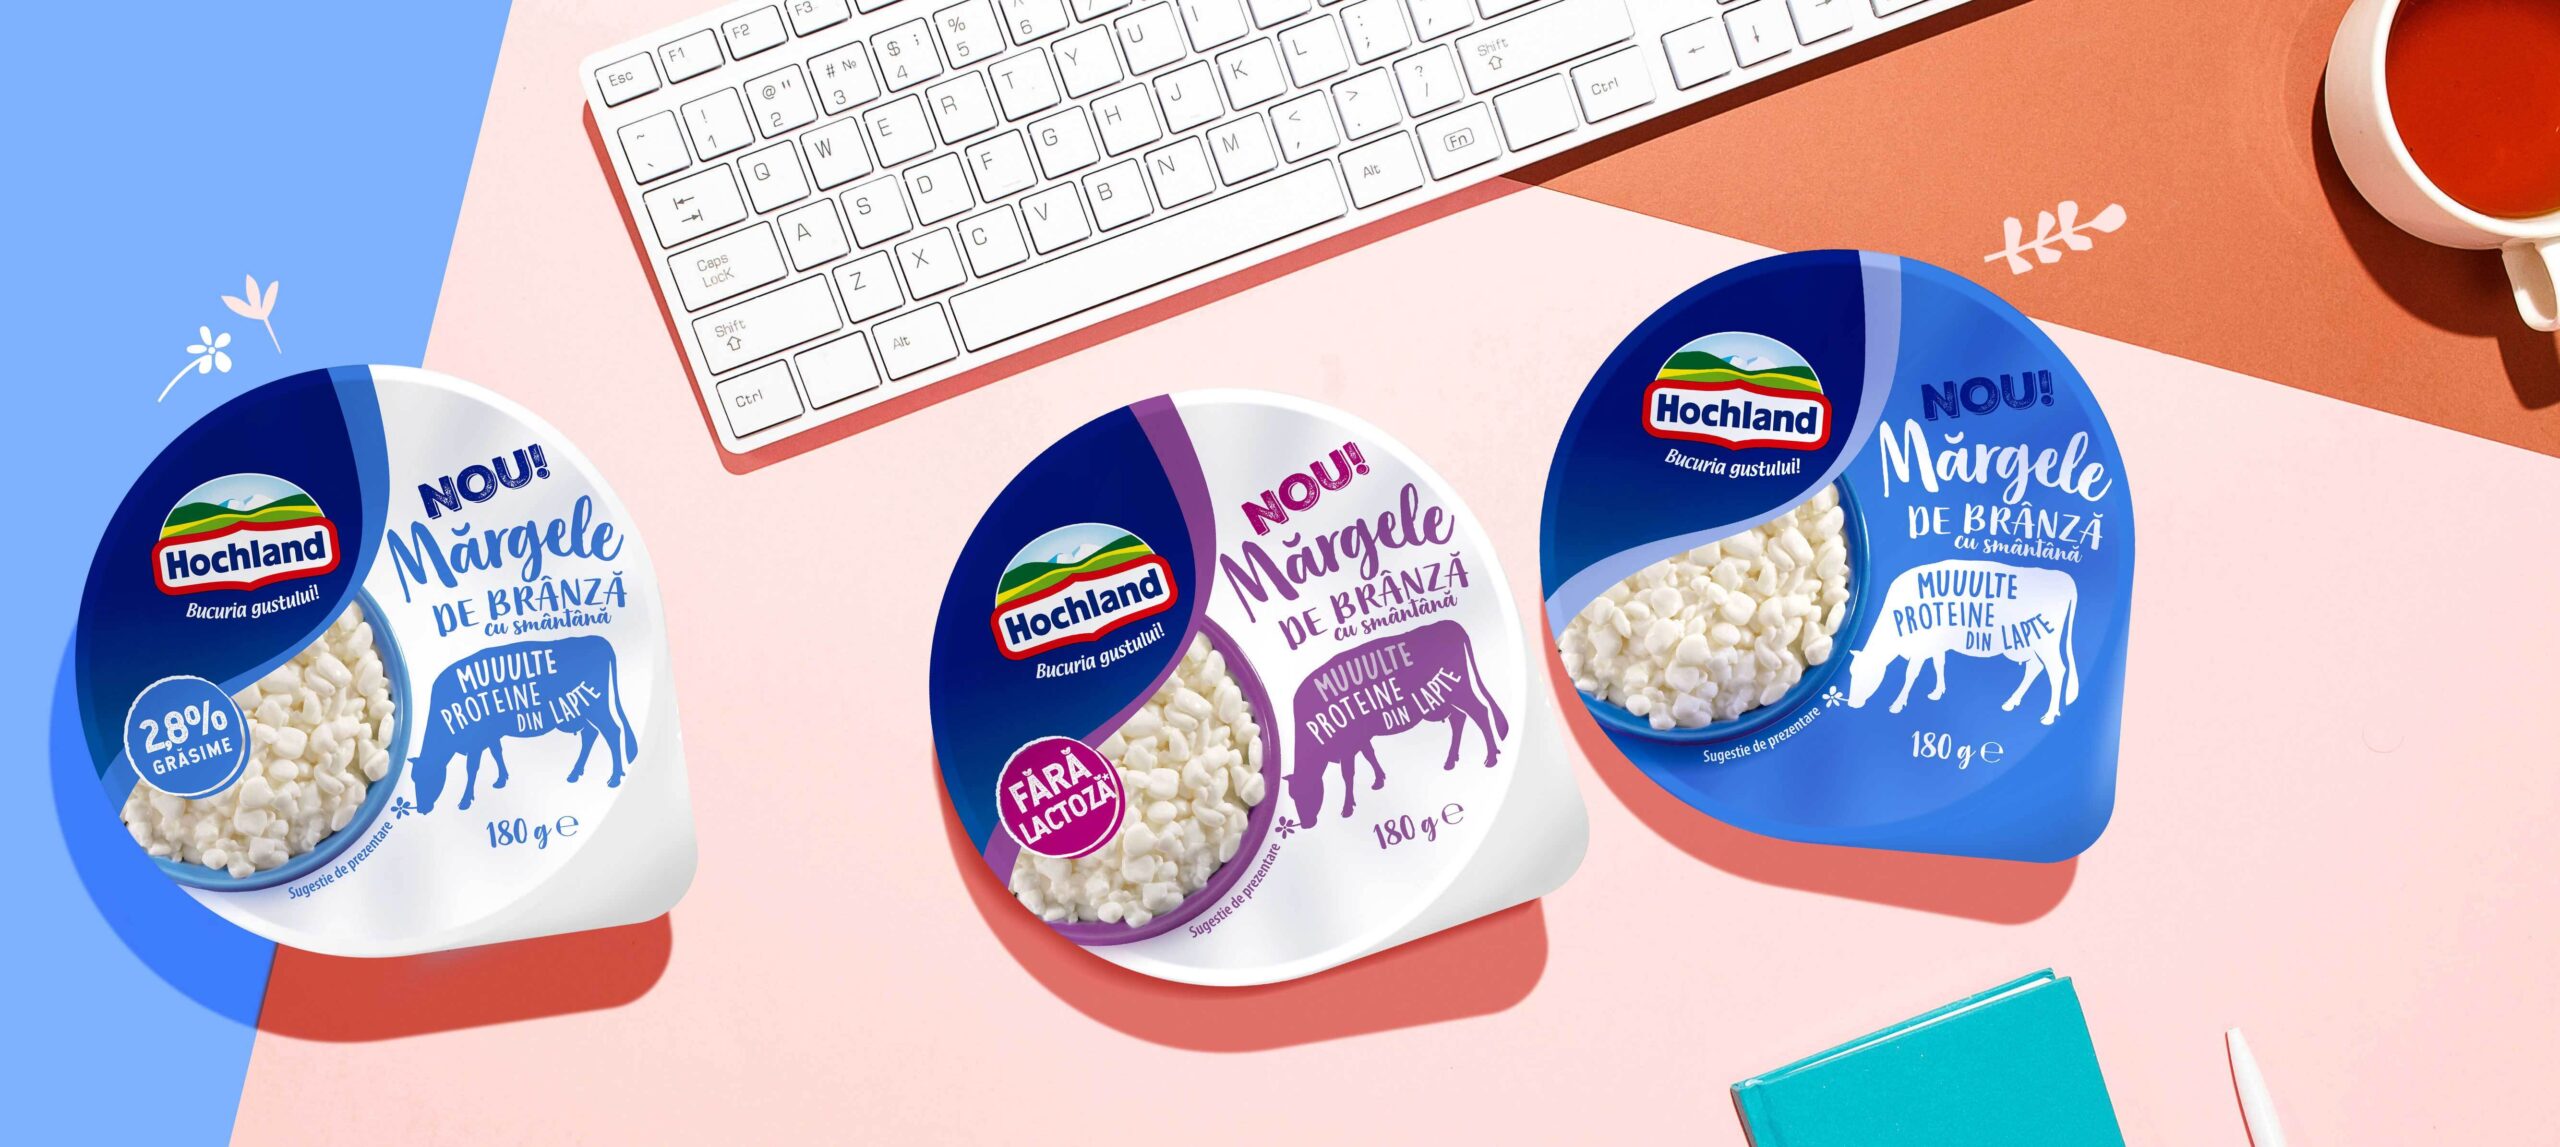 Cottage cheese packaging design for Hochland Margele de Branza line in an office surrounding. - desk, cup of tea and keyboard.